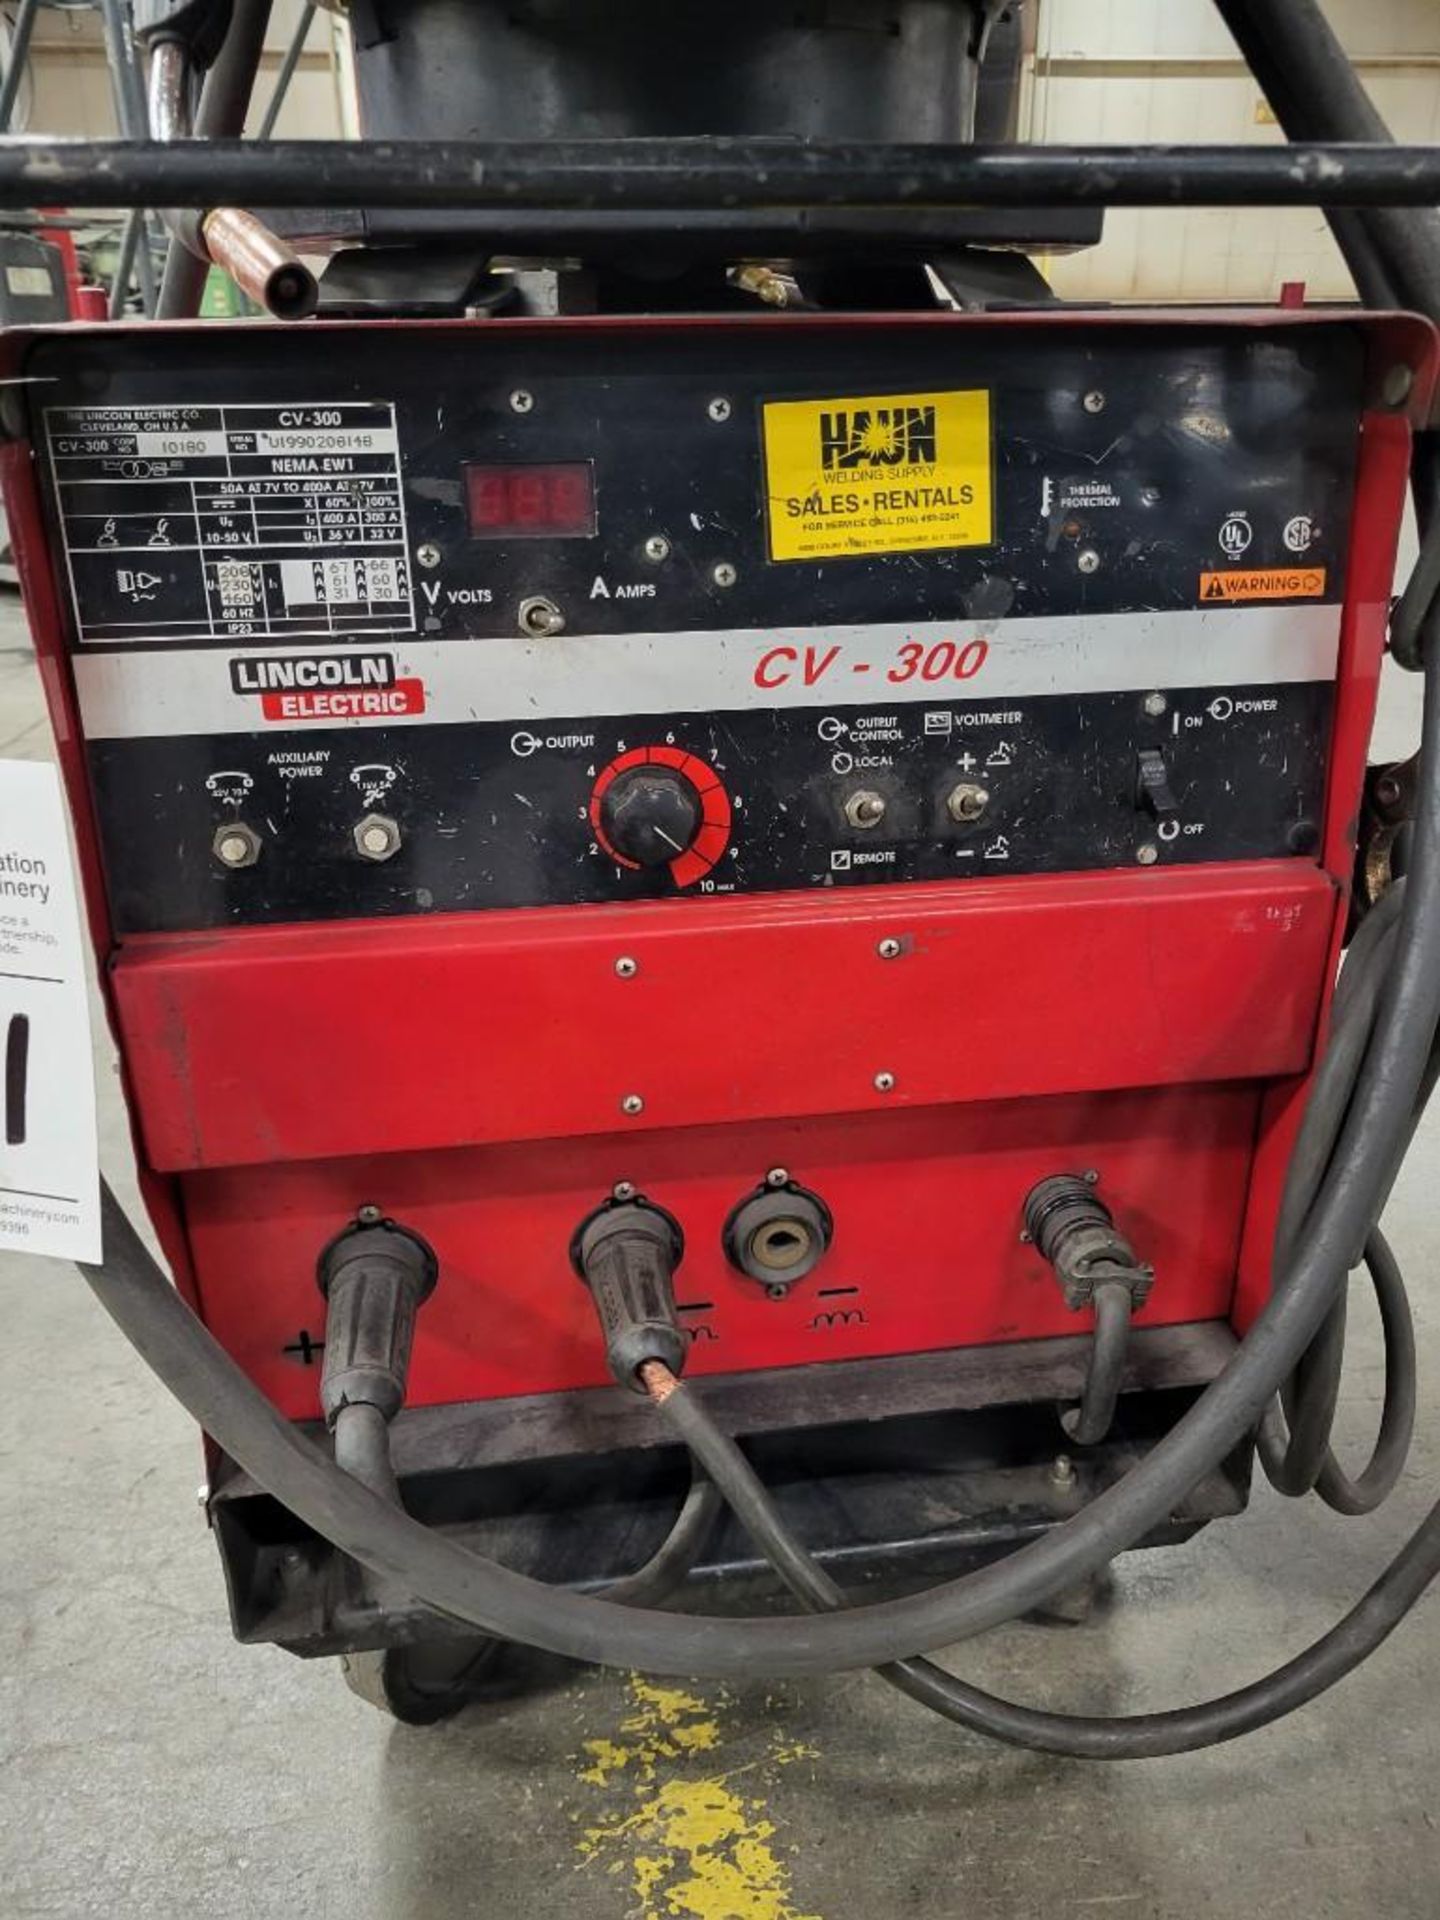 LINCOLN ELECTRIC CV-300 MIG WELDER WITH LN-7 WIRE FEEDER - Image 6 of 8